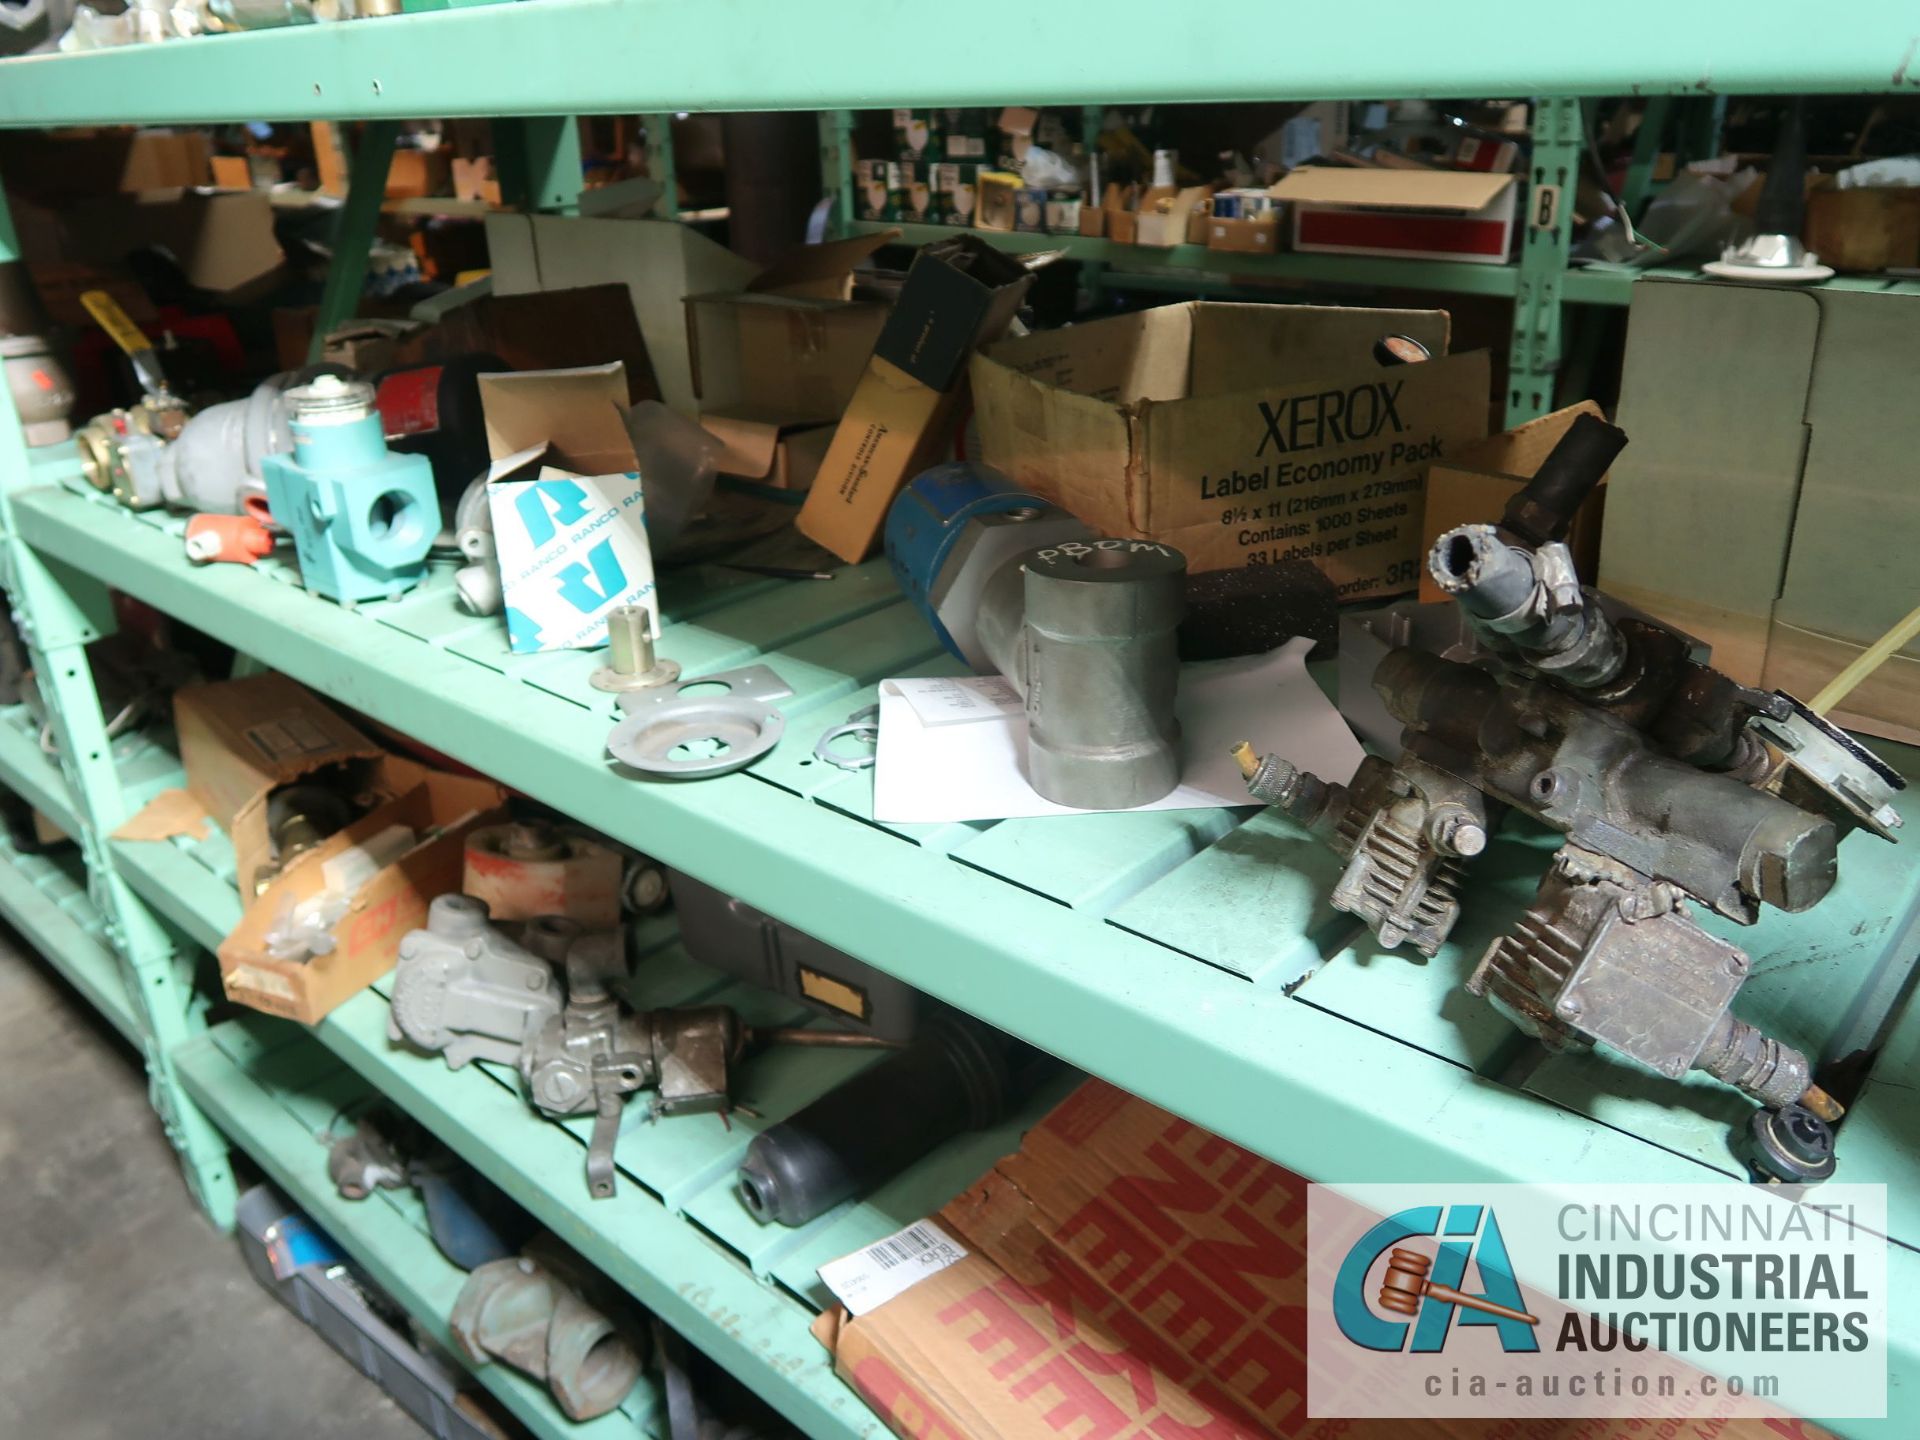 CONTENTS OF (6) RACKS INCLUDING MISCELLANEOUS VALVES, SEALS, FILTERS, PLUMBING PARTS, FIRE SPRINKLER - Image 10 of 26